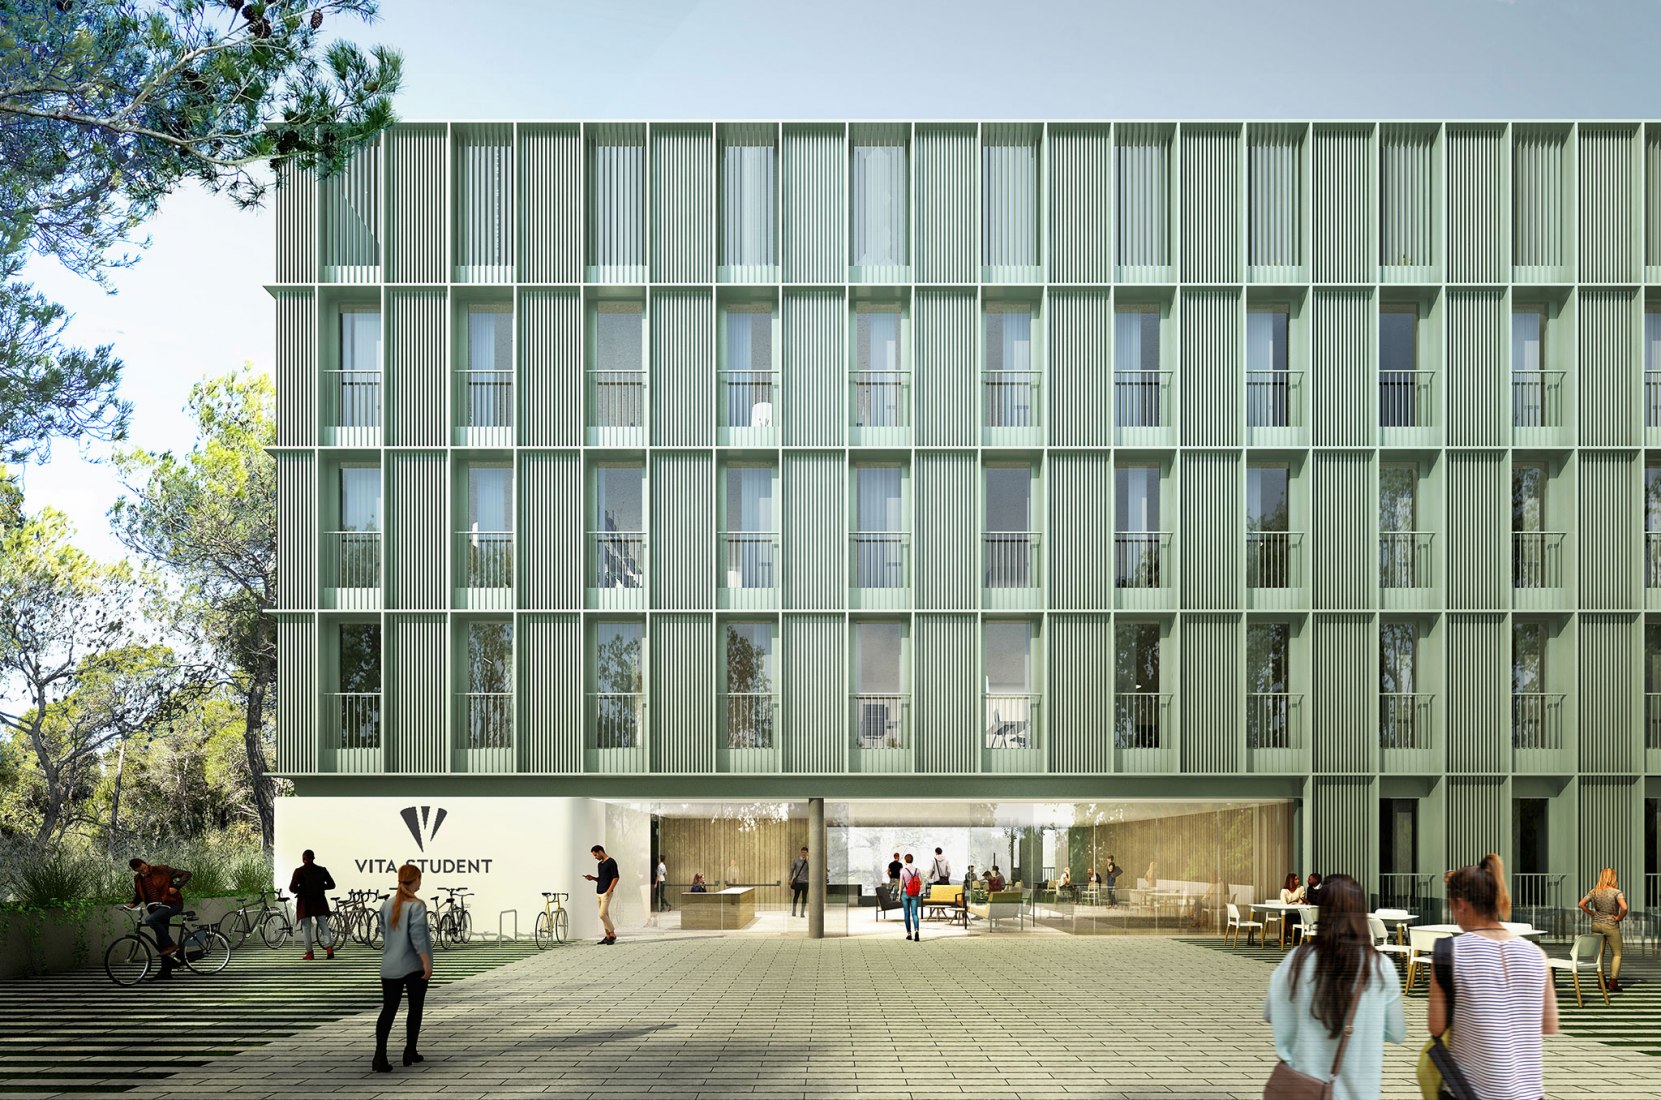 Student residence with 274 rooms in Pedralbes by Batlleiroig. Rendering by SBDA.